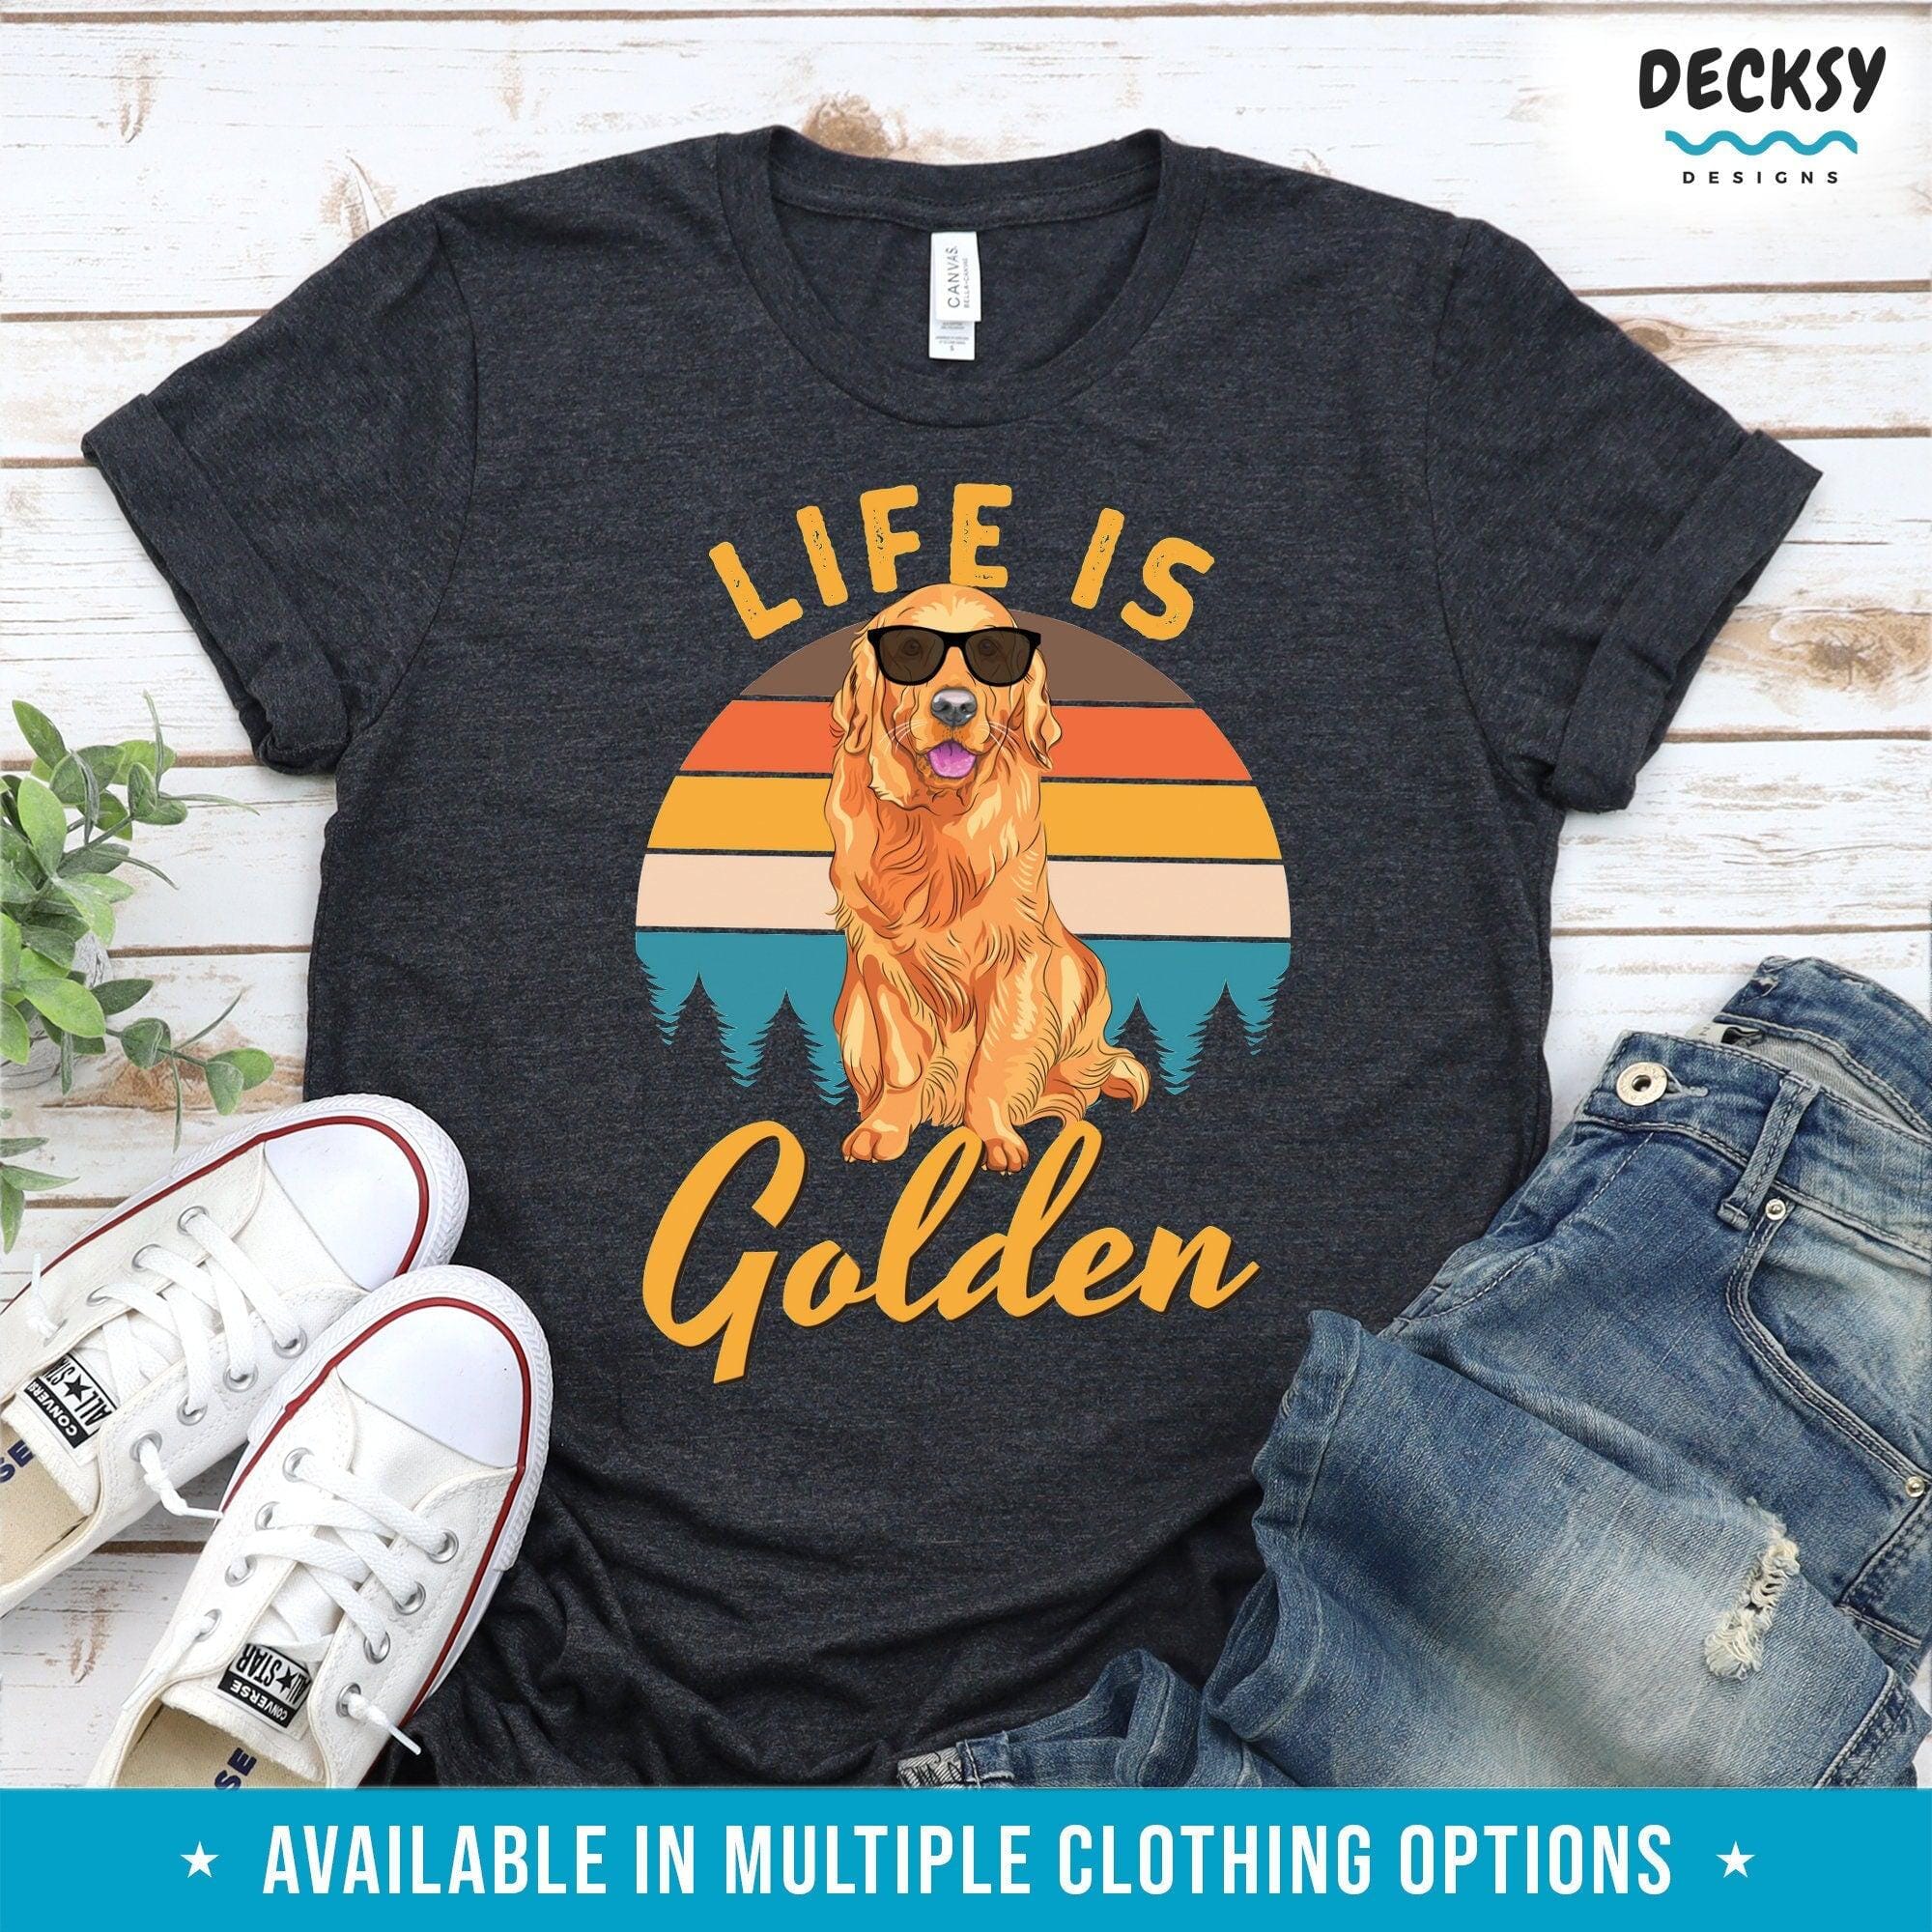 Golden Retriever Shirt, Gift for Golden Retriever Dog Lover-Clothing:Gender-Neutral Adult Clothing:Tops & Tees:T-shirts:Graphic Tees-DecksyDesigns